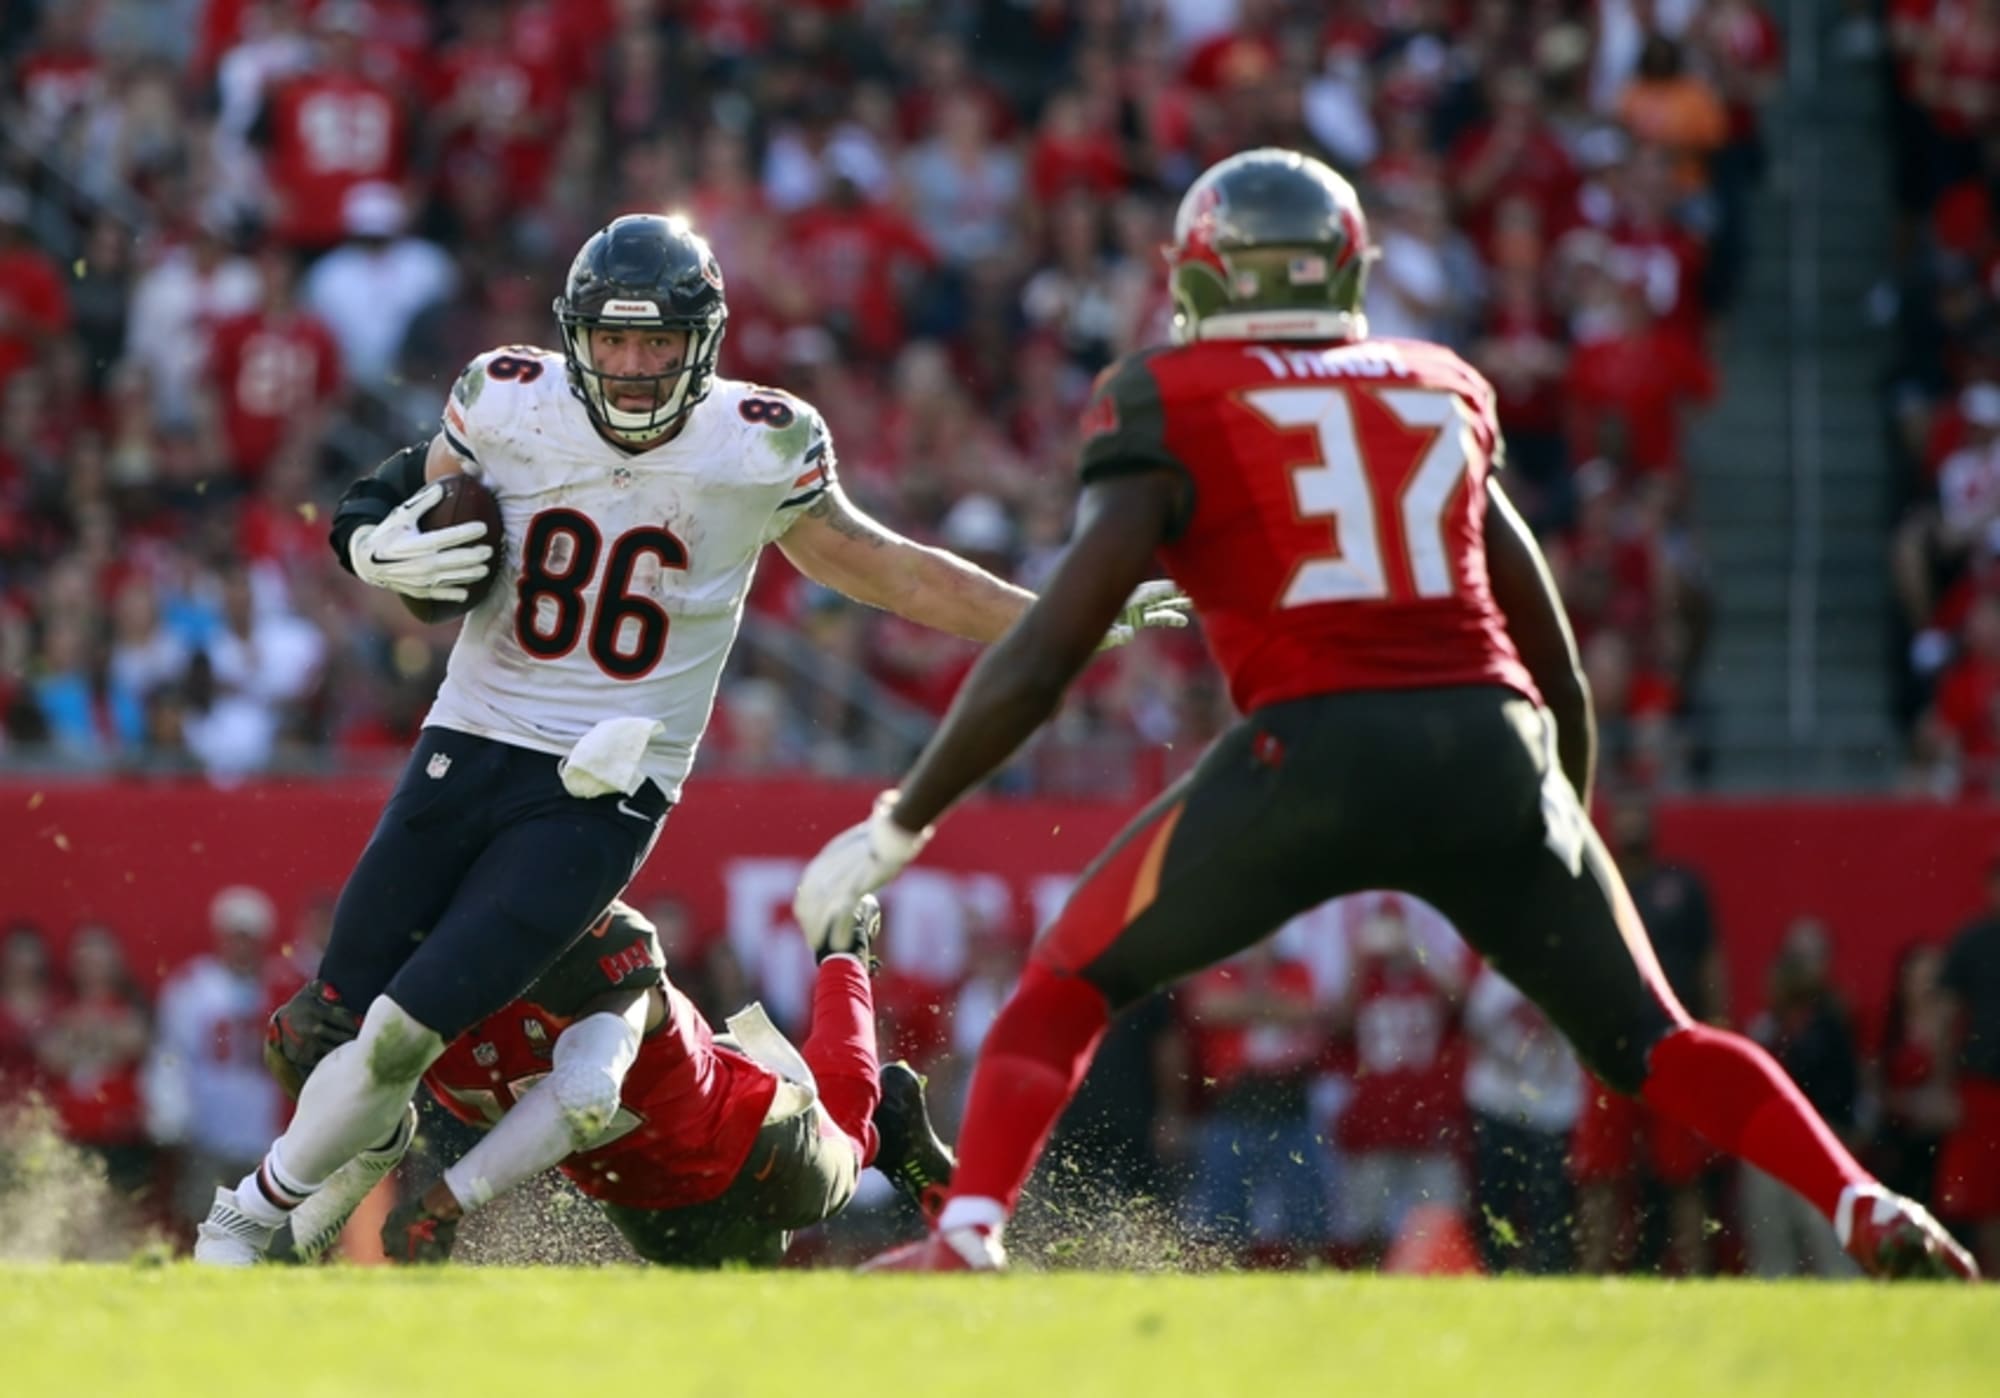 2016 NFL free agency: Who will Zach Miller sign with?